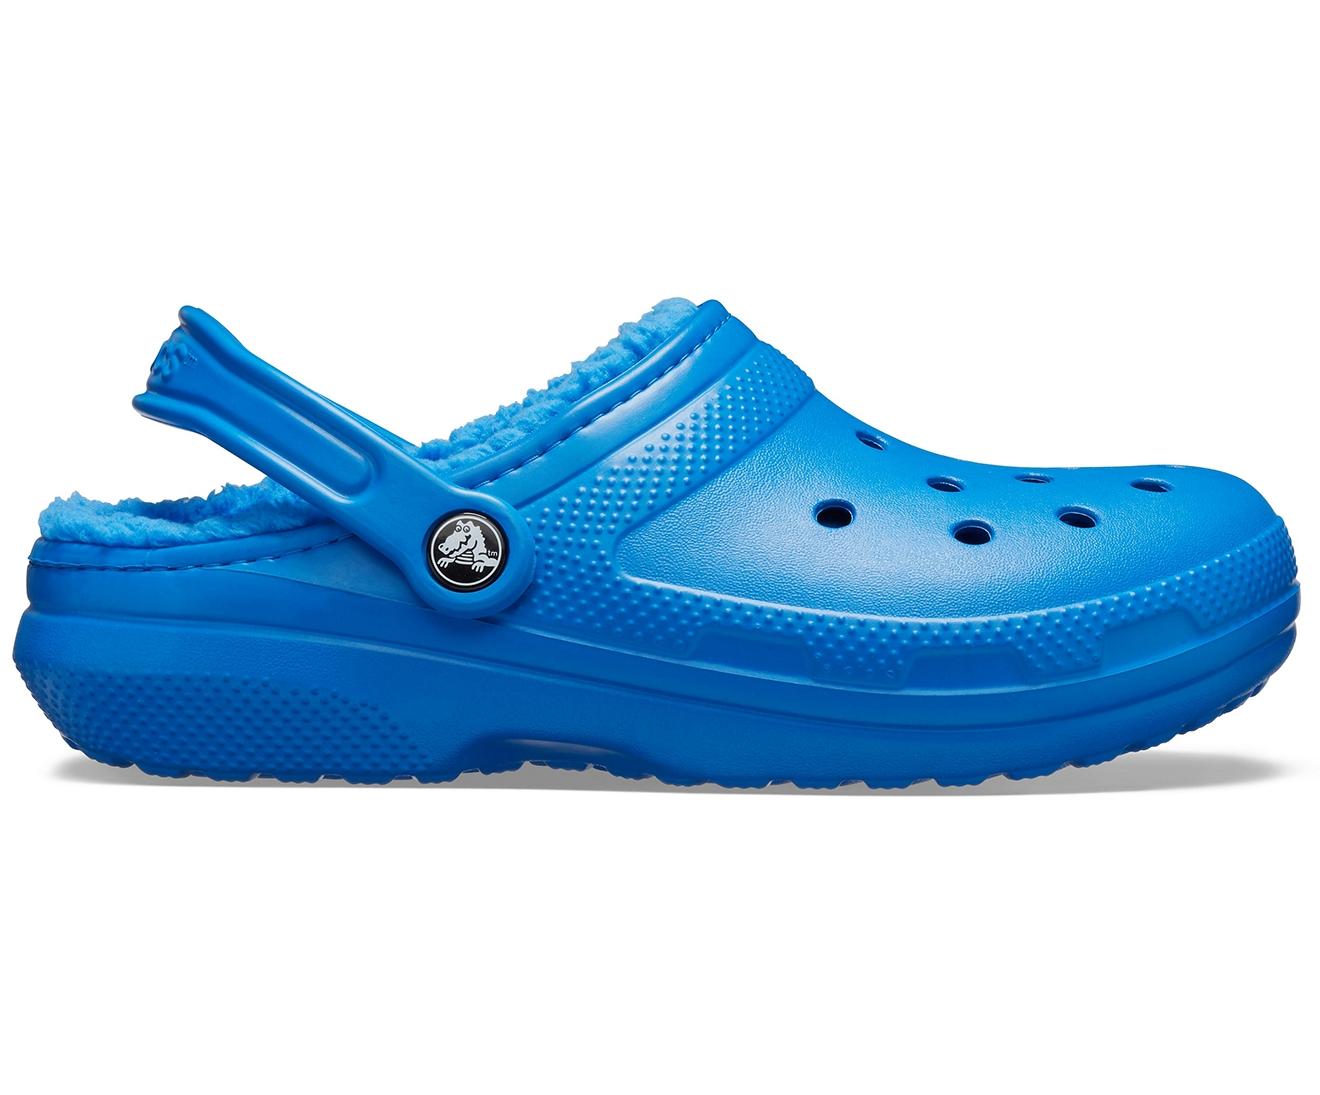 Navy Blue Crocs With Fur : Crocs Shoes Com / Walk on air and water with ...